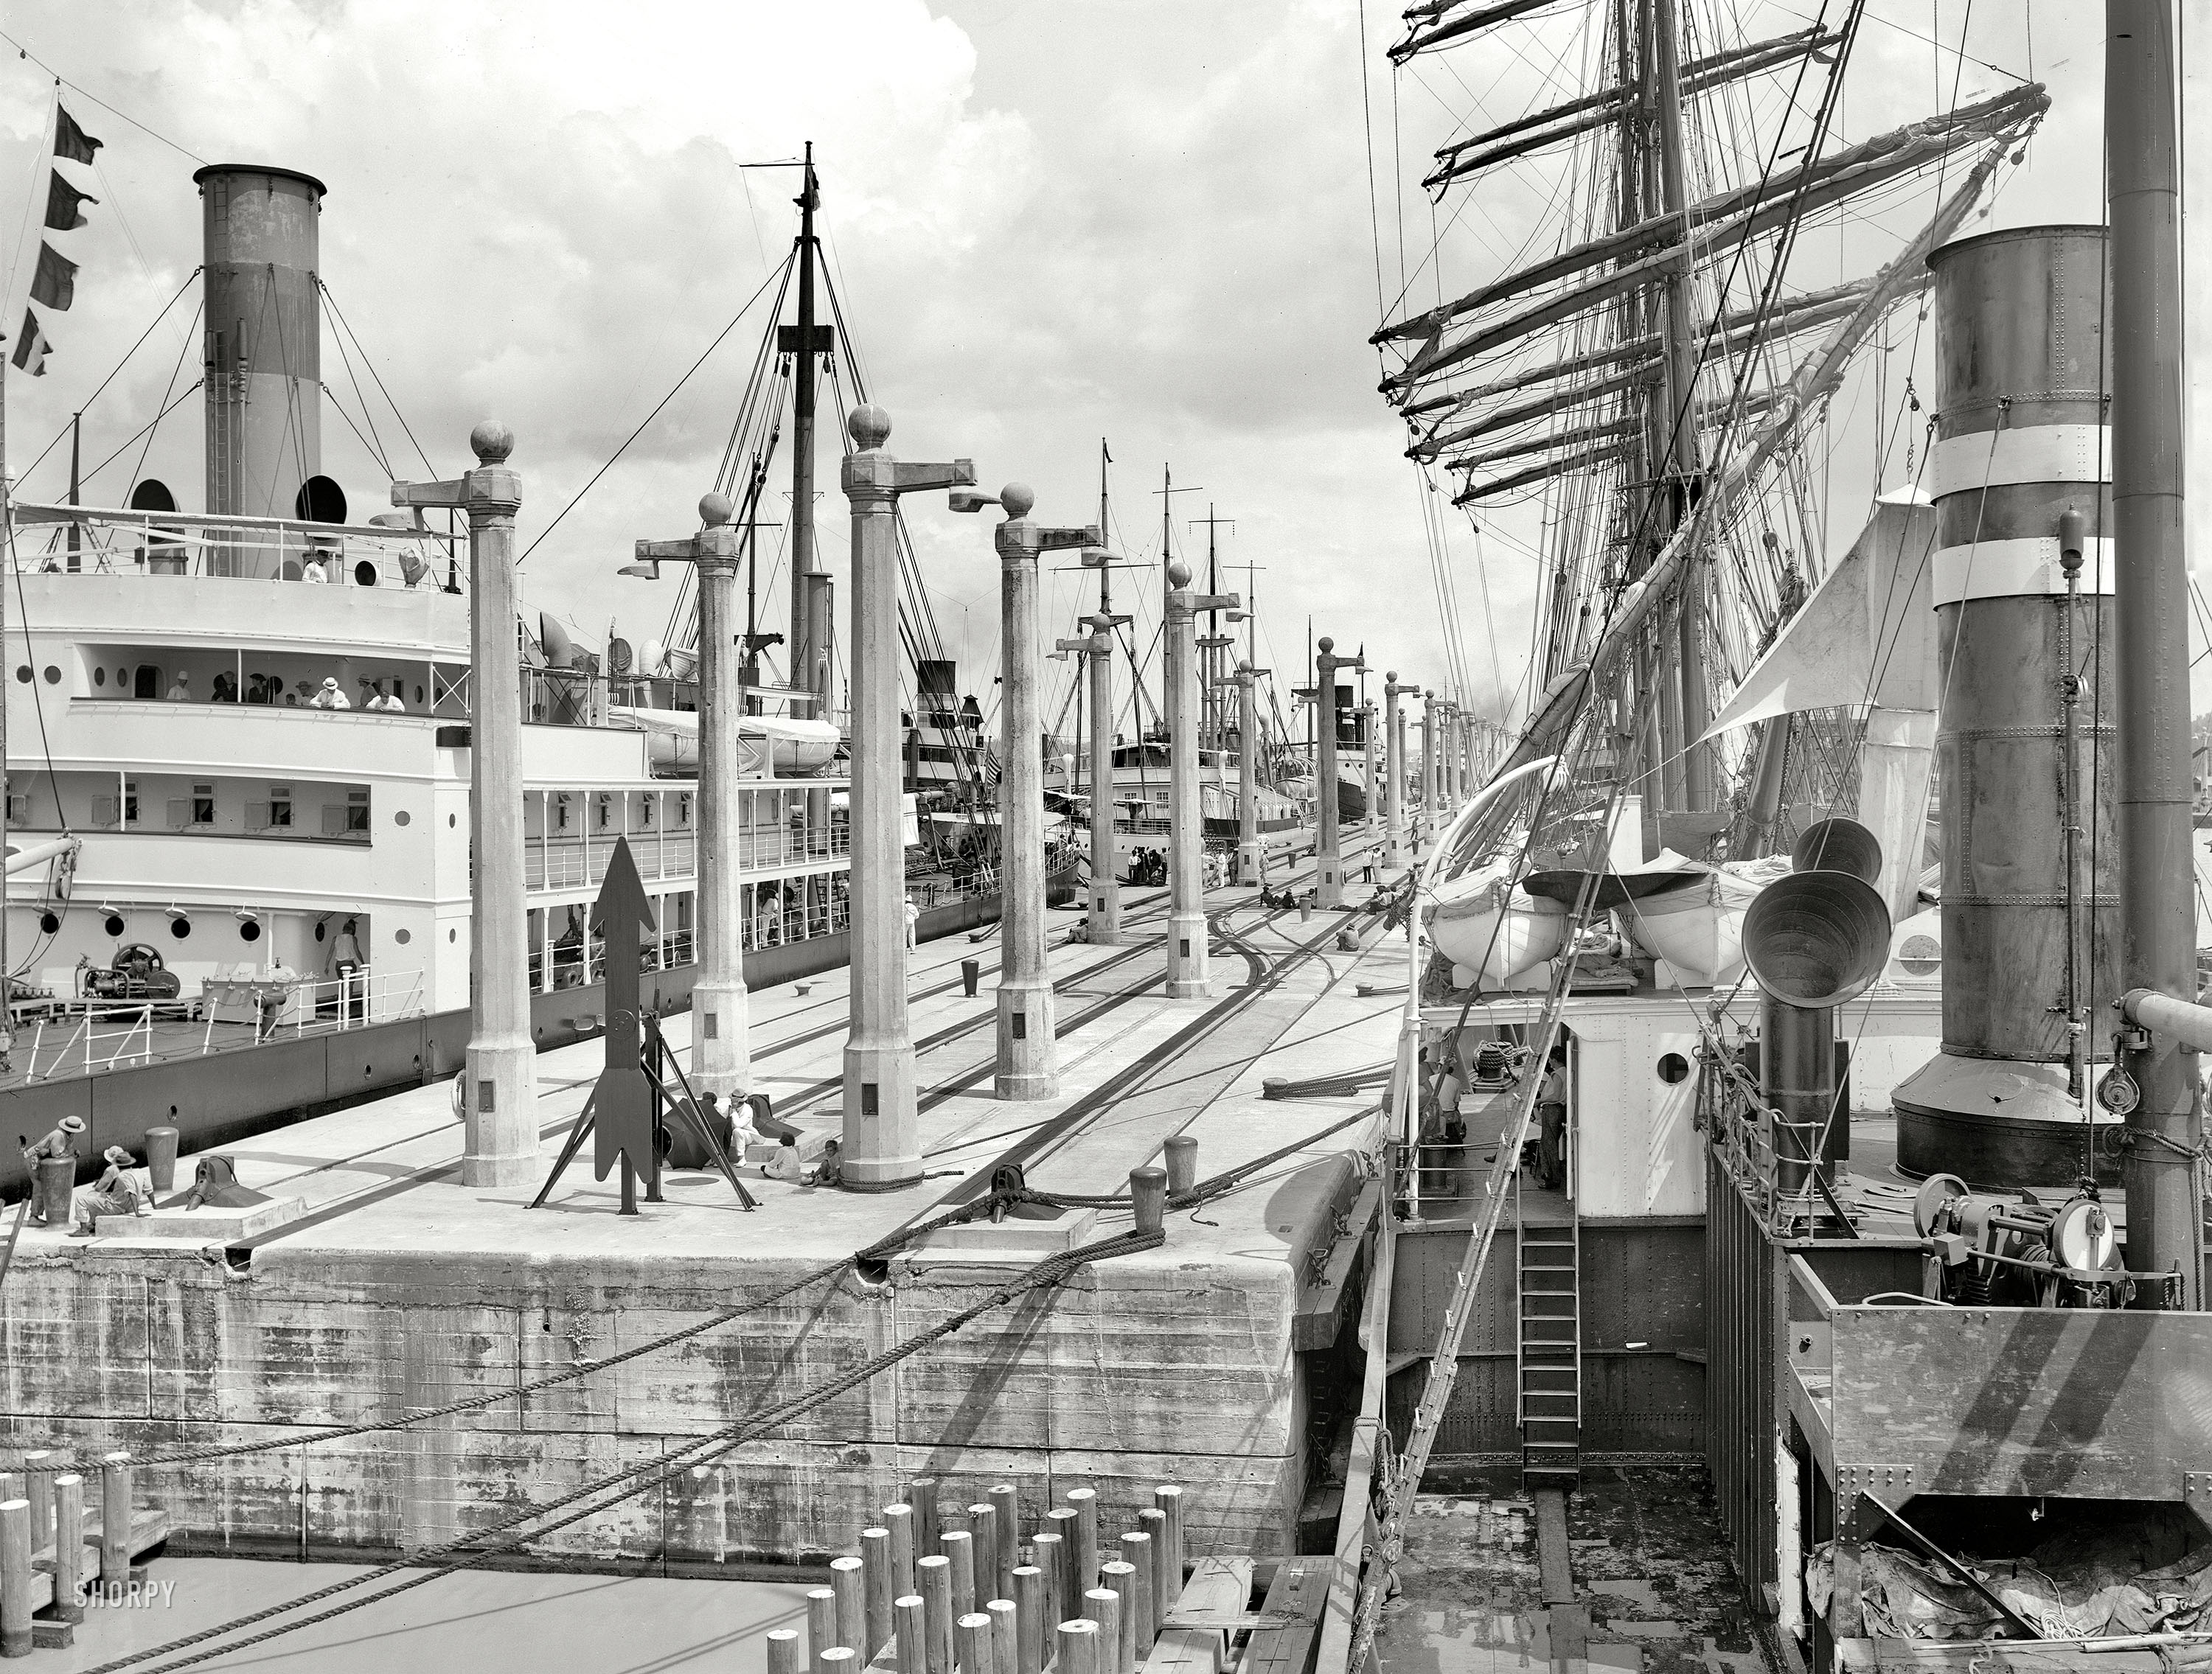 Circa 1915. "North approach, Pedro Miguel Lock, Panama Canal." 8x10 inch dry plate glass negative, Detroit Publishing Company. View full size.